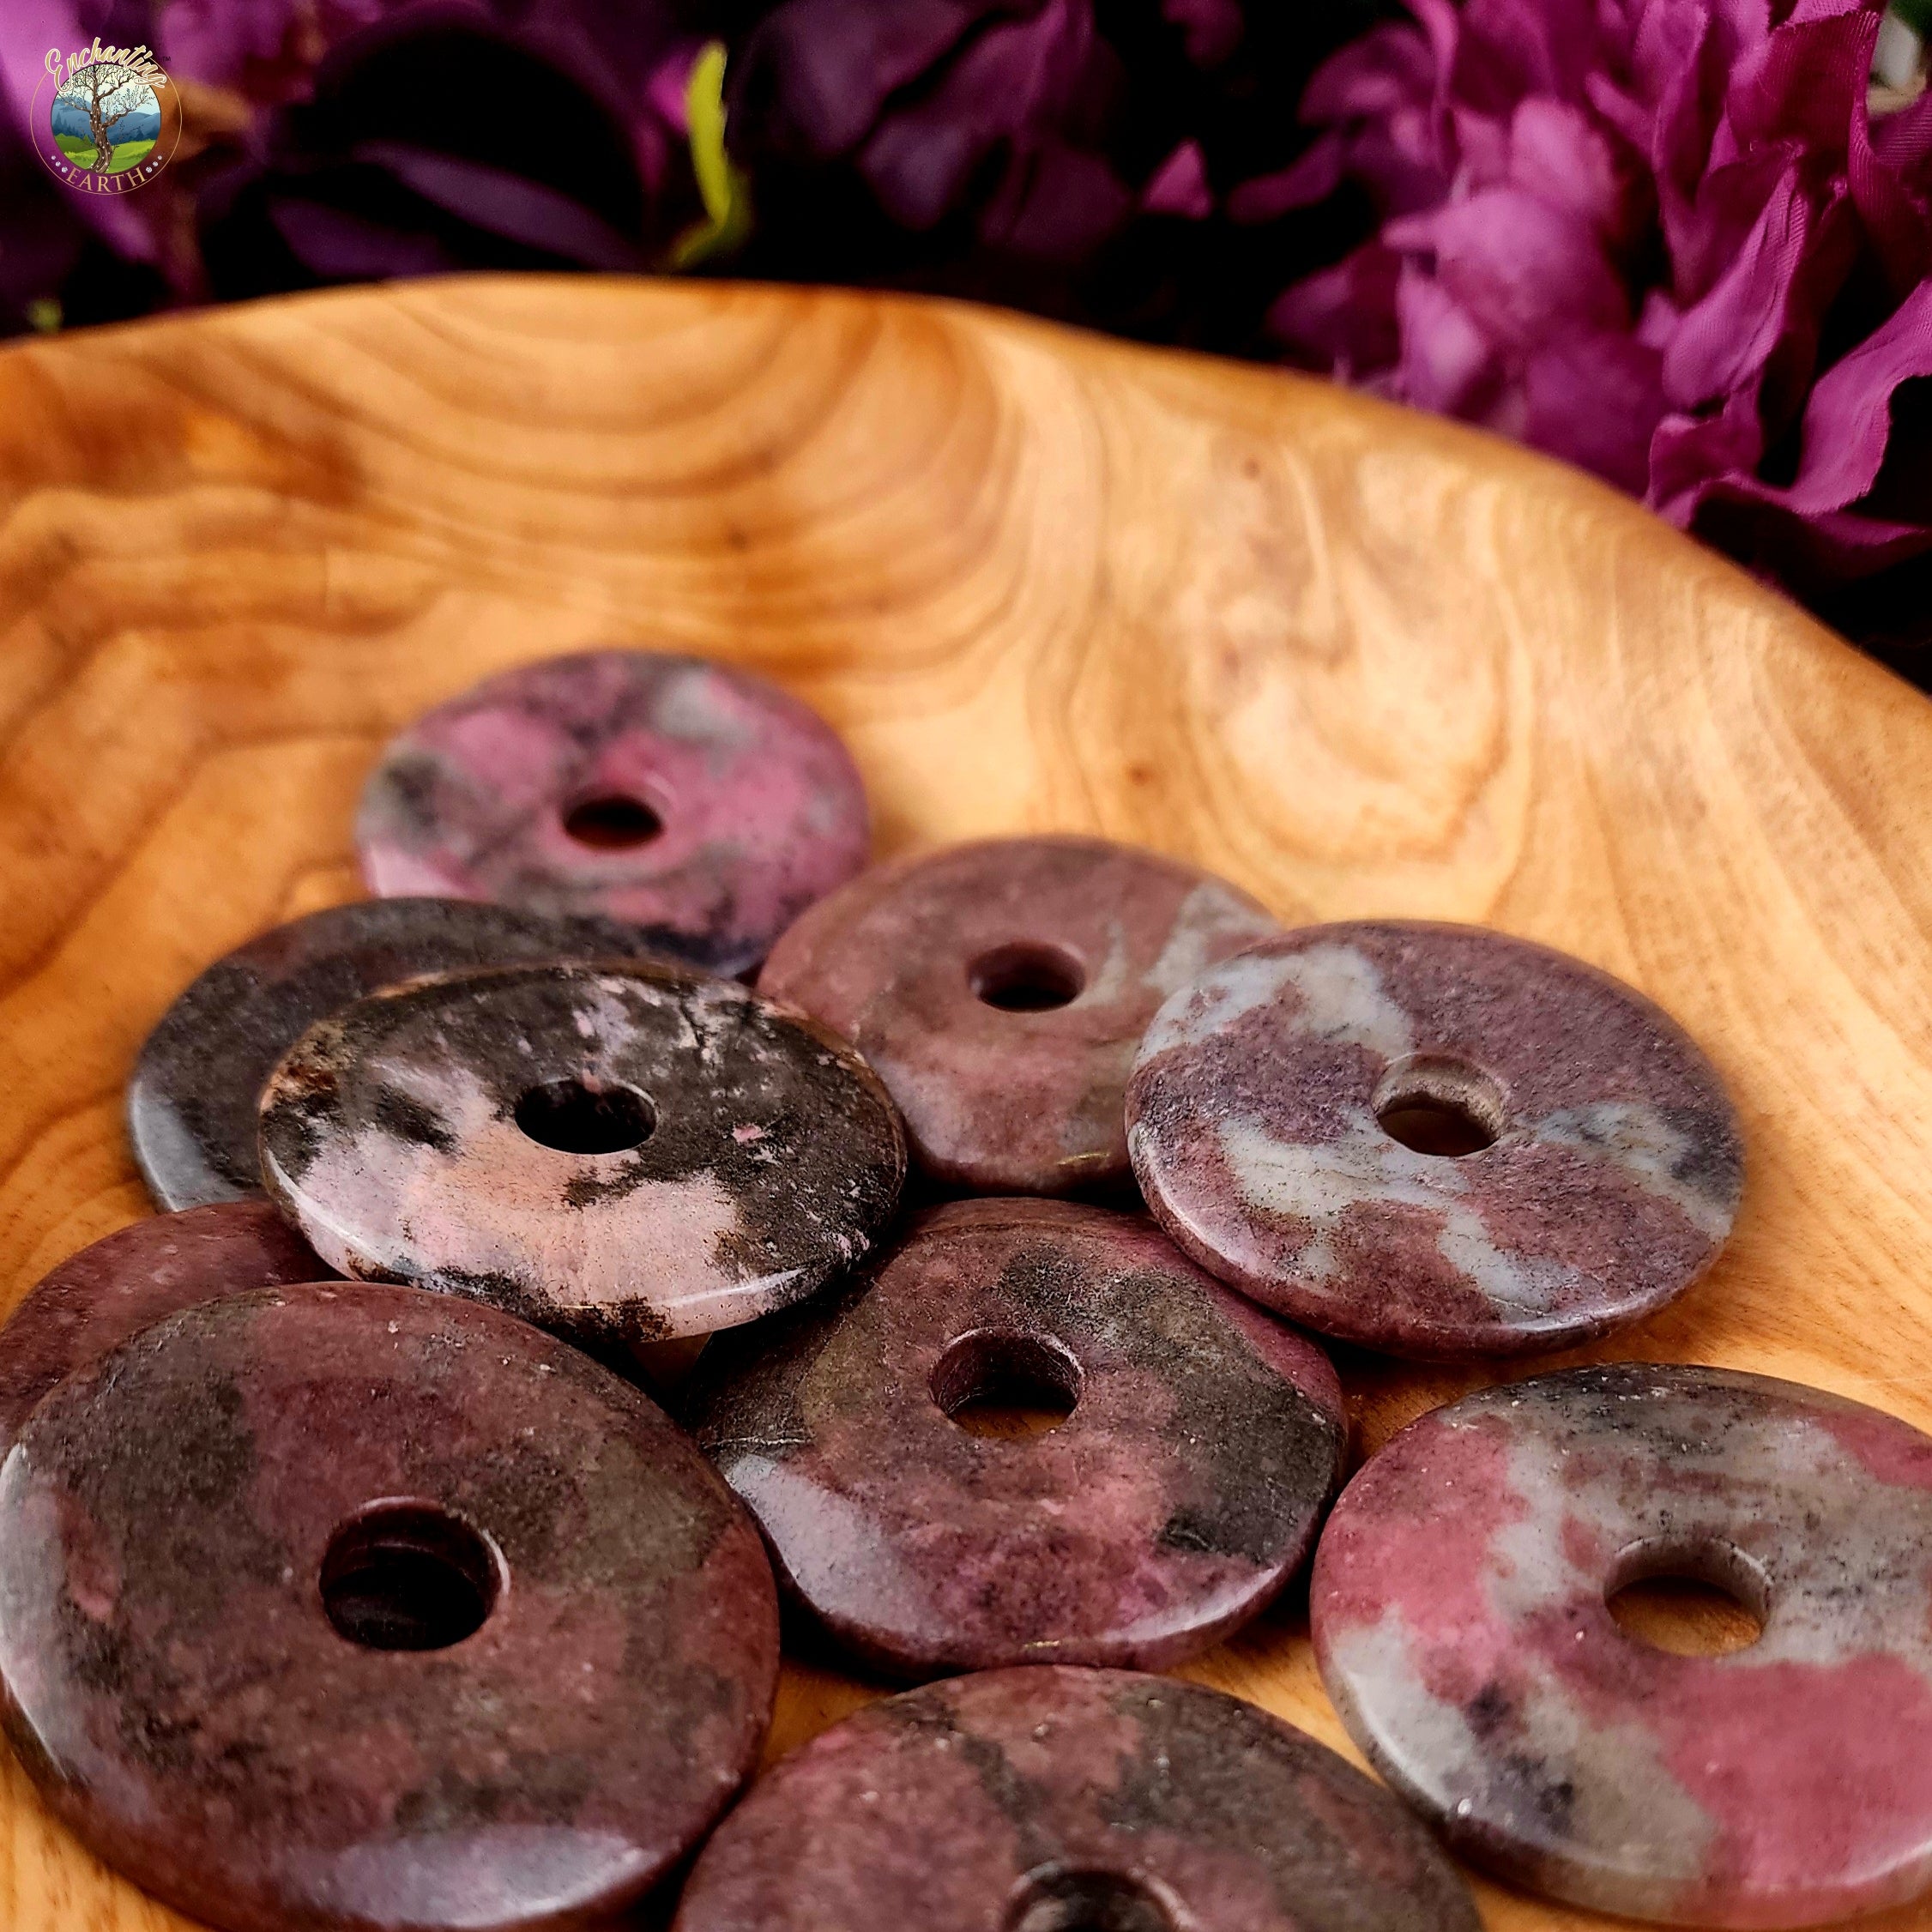 Rhodonite Donut for Attraction, Joy and Love